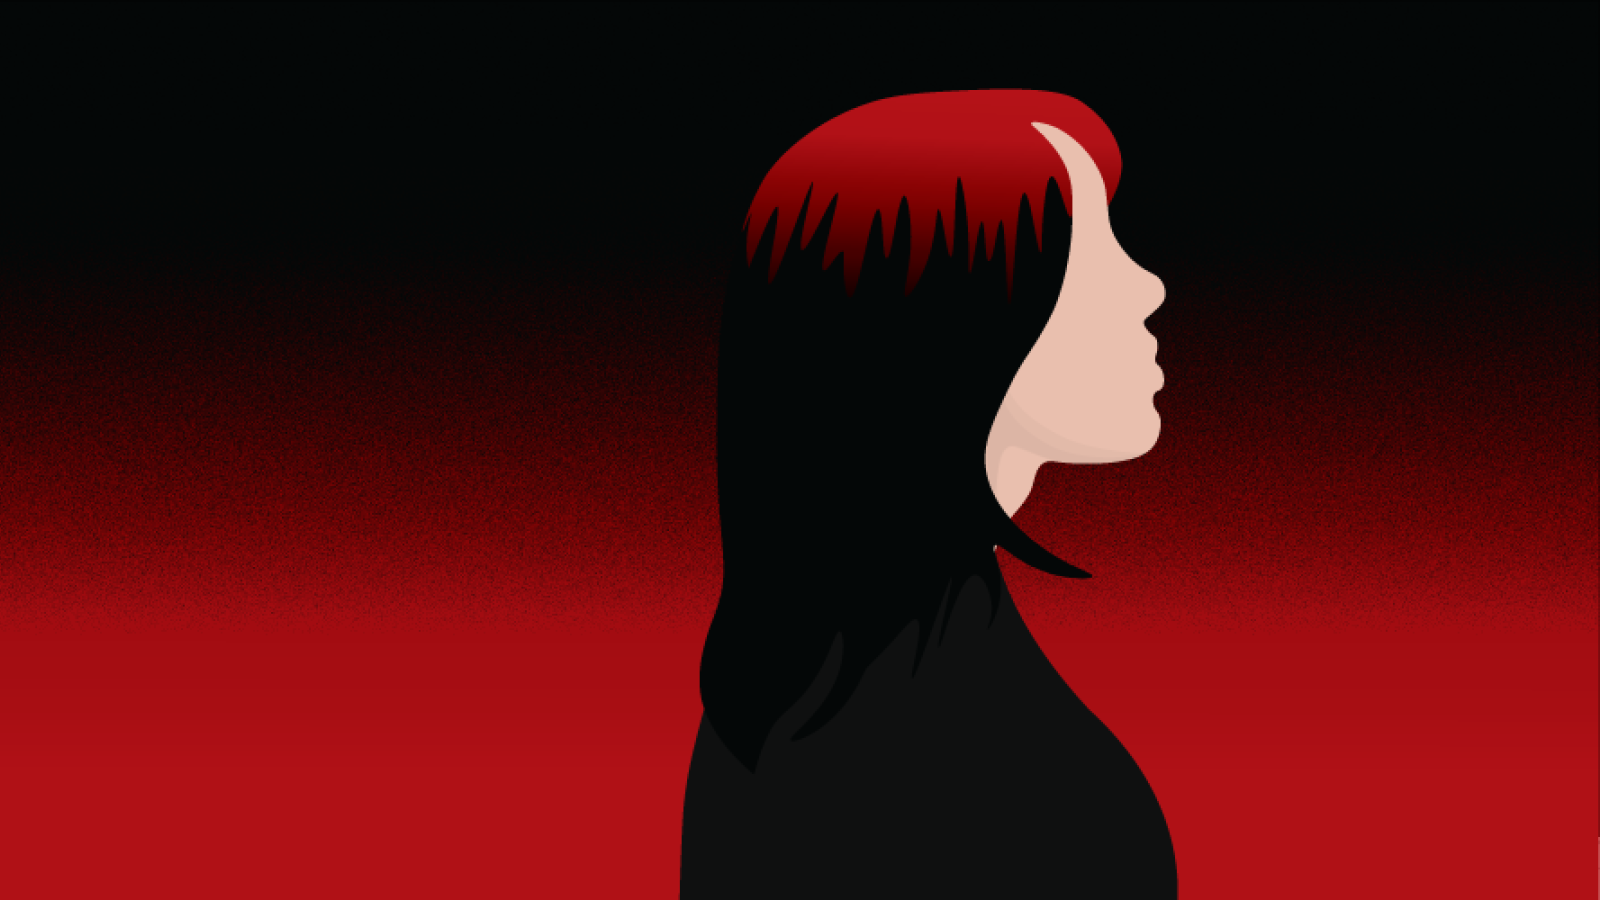 Background is a gradient from black to red and an artist drawing of a silhoutte of singer